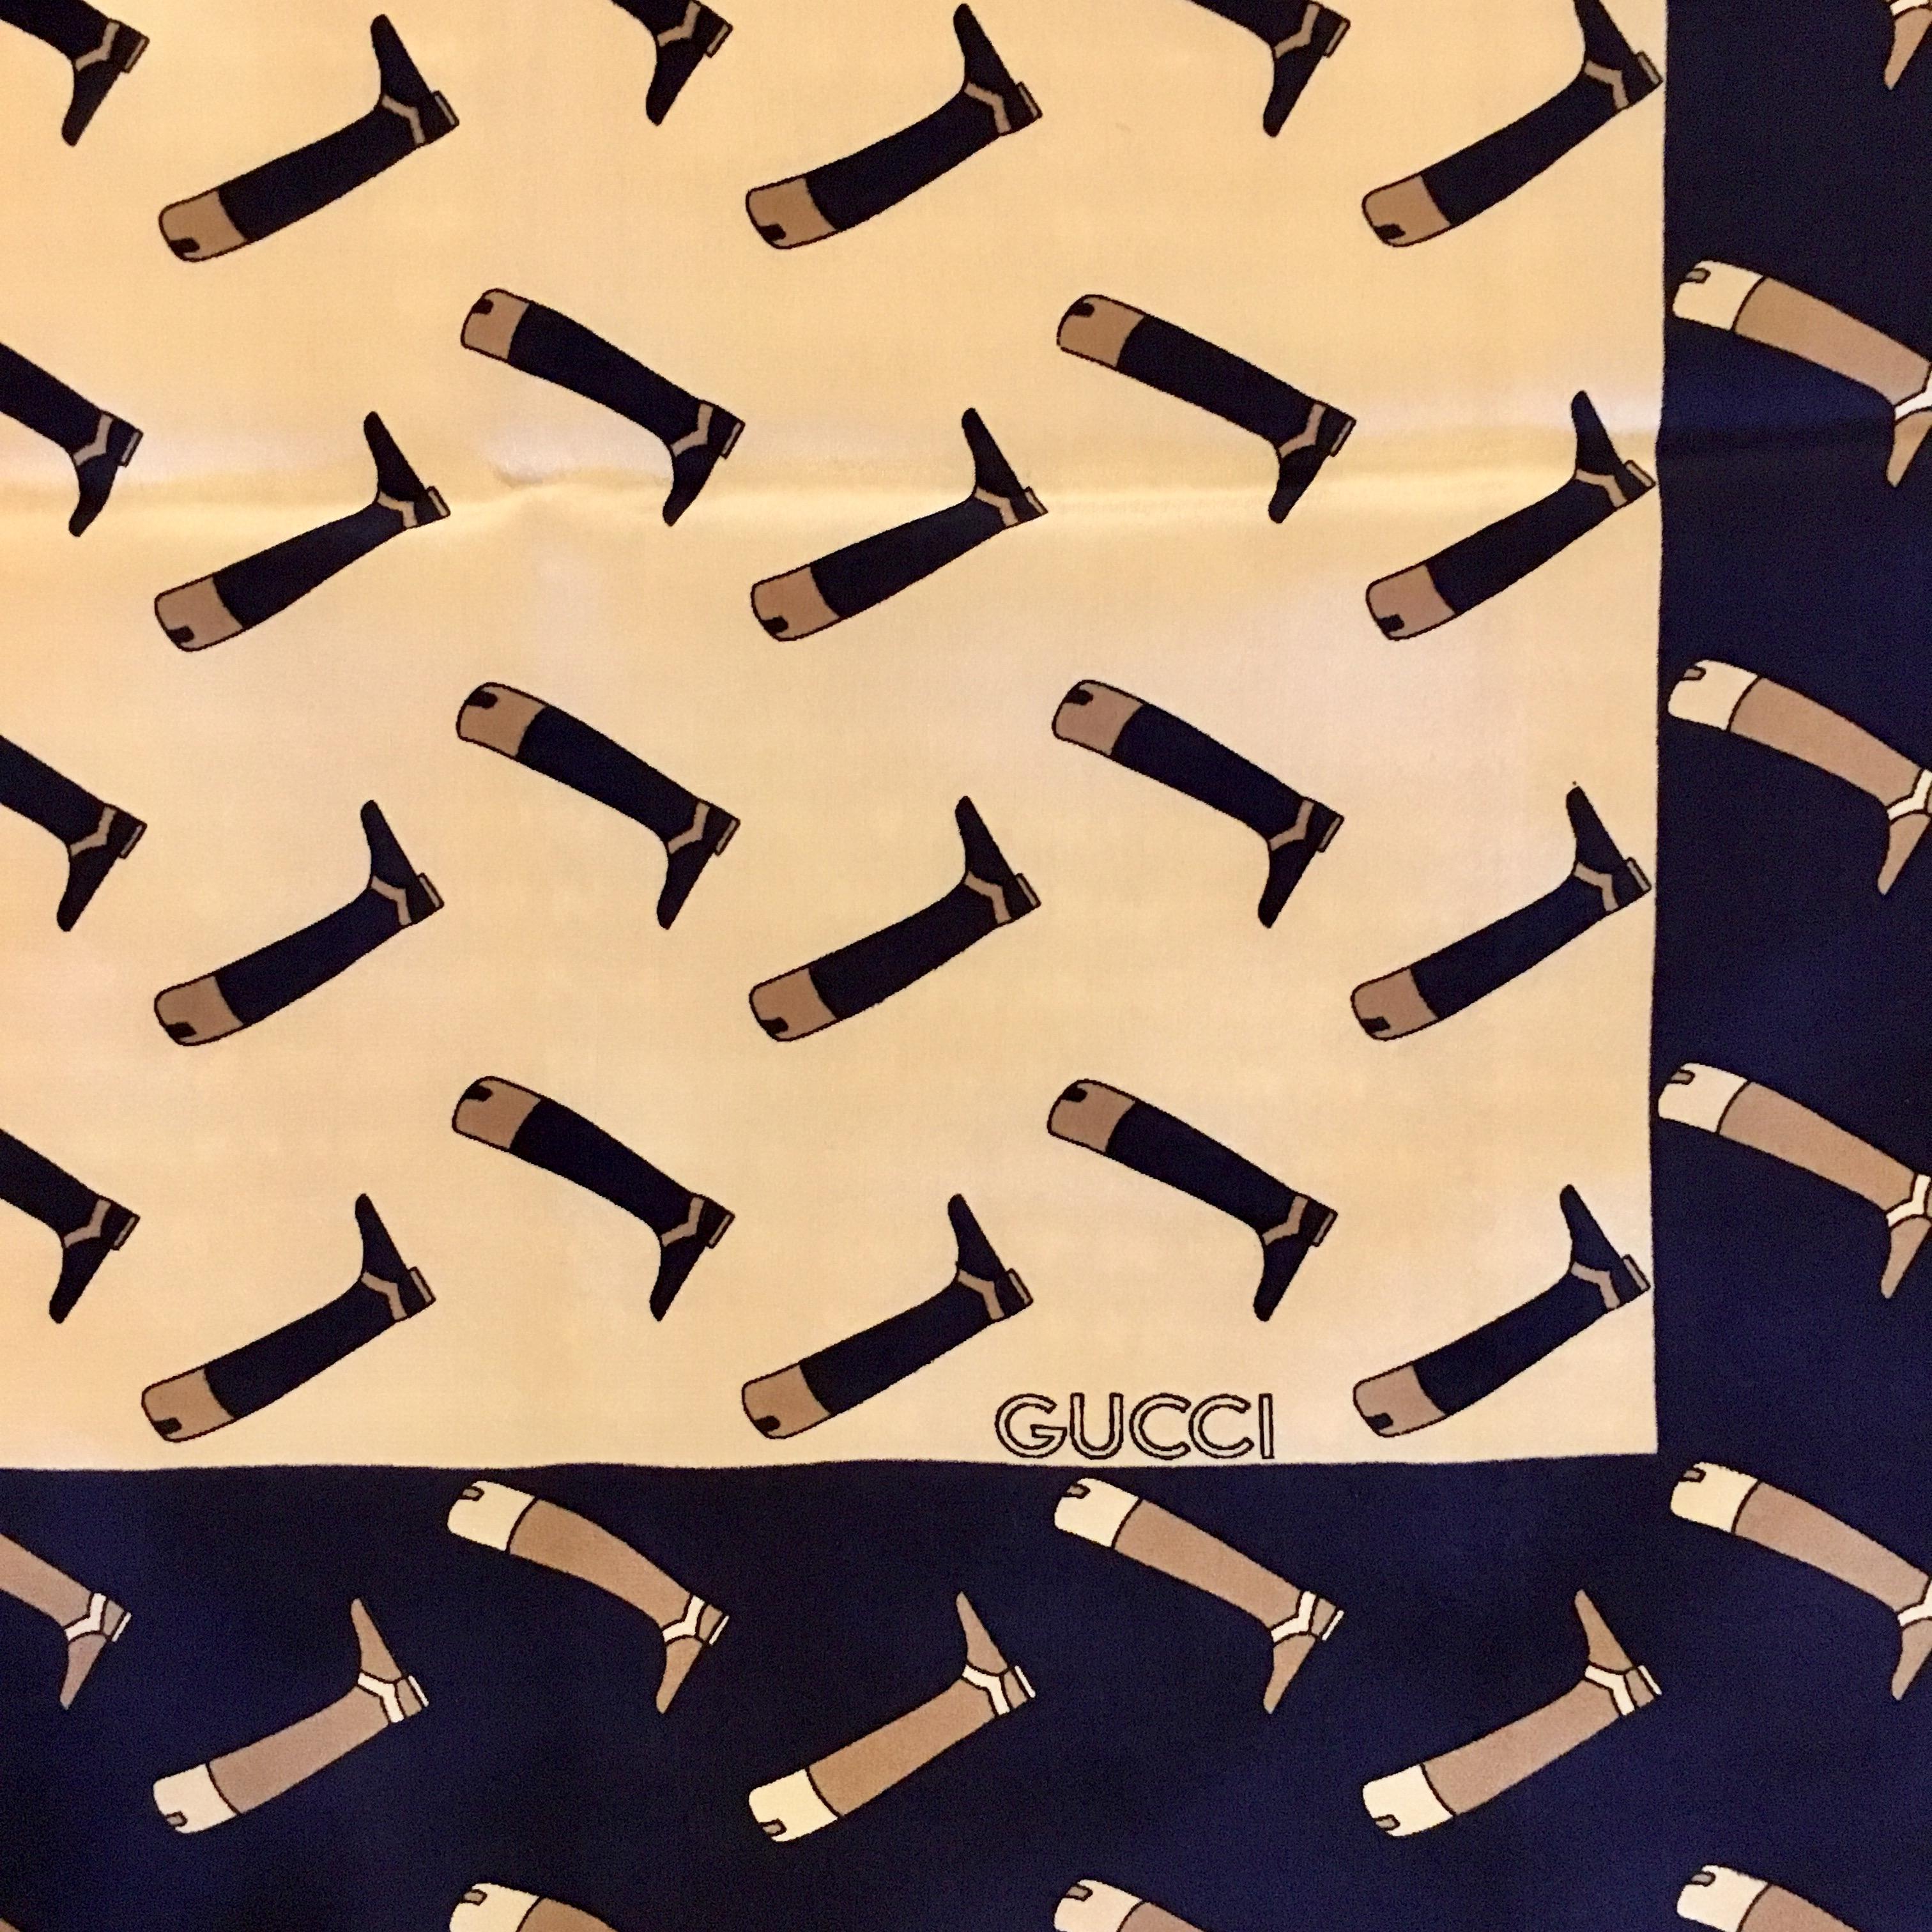 This fabulous 1976 silk Gucci scarf features a riding boot pattern. The main body of the scarf is cream with navy boots printed on it. It has a contrasting navy border with tan riding boots. It measures 35 inches x 32 1/8 inches. It is in excellent